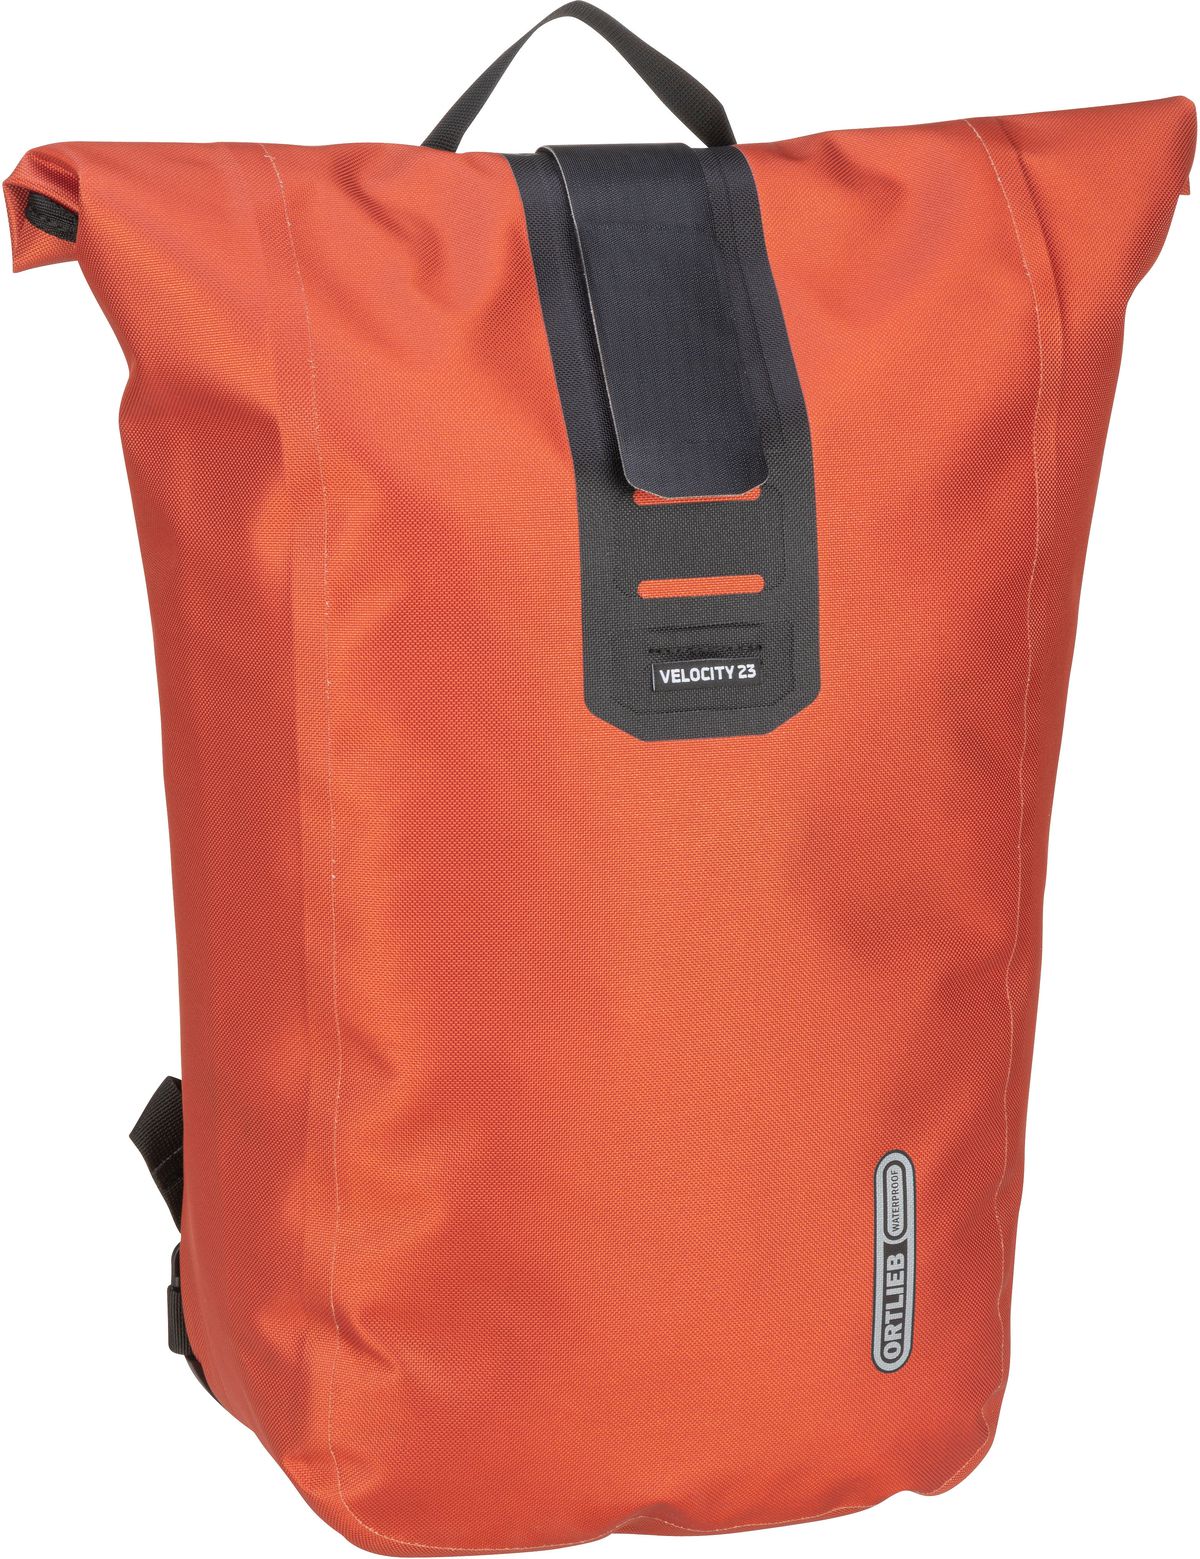 ORTLIEB Velocity PS 23L - Rooibos